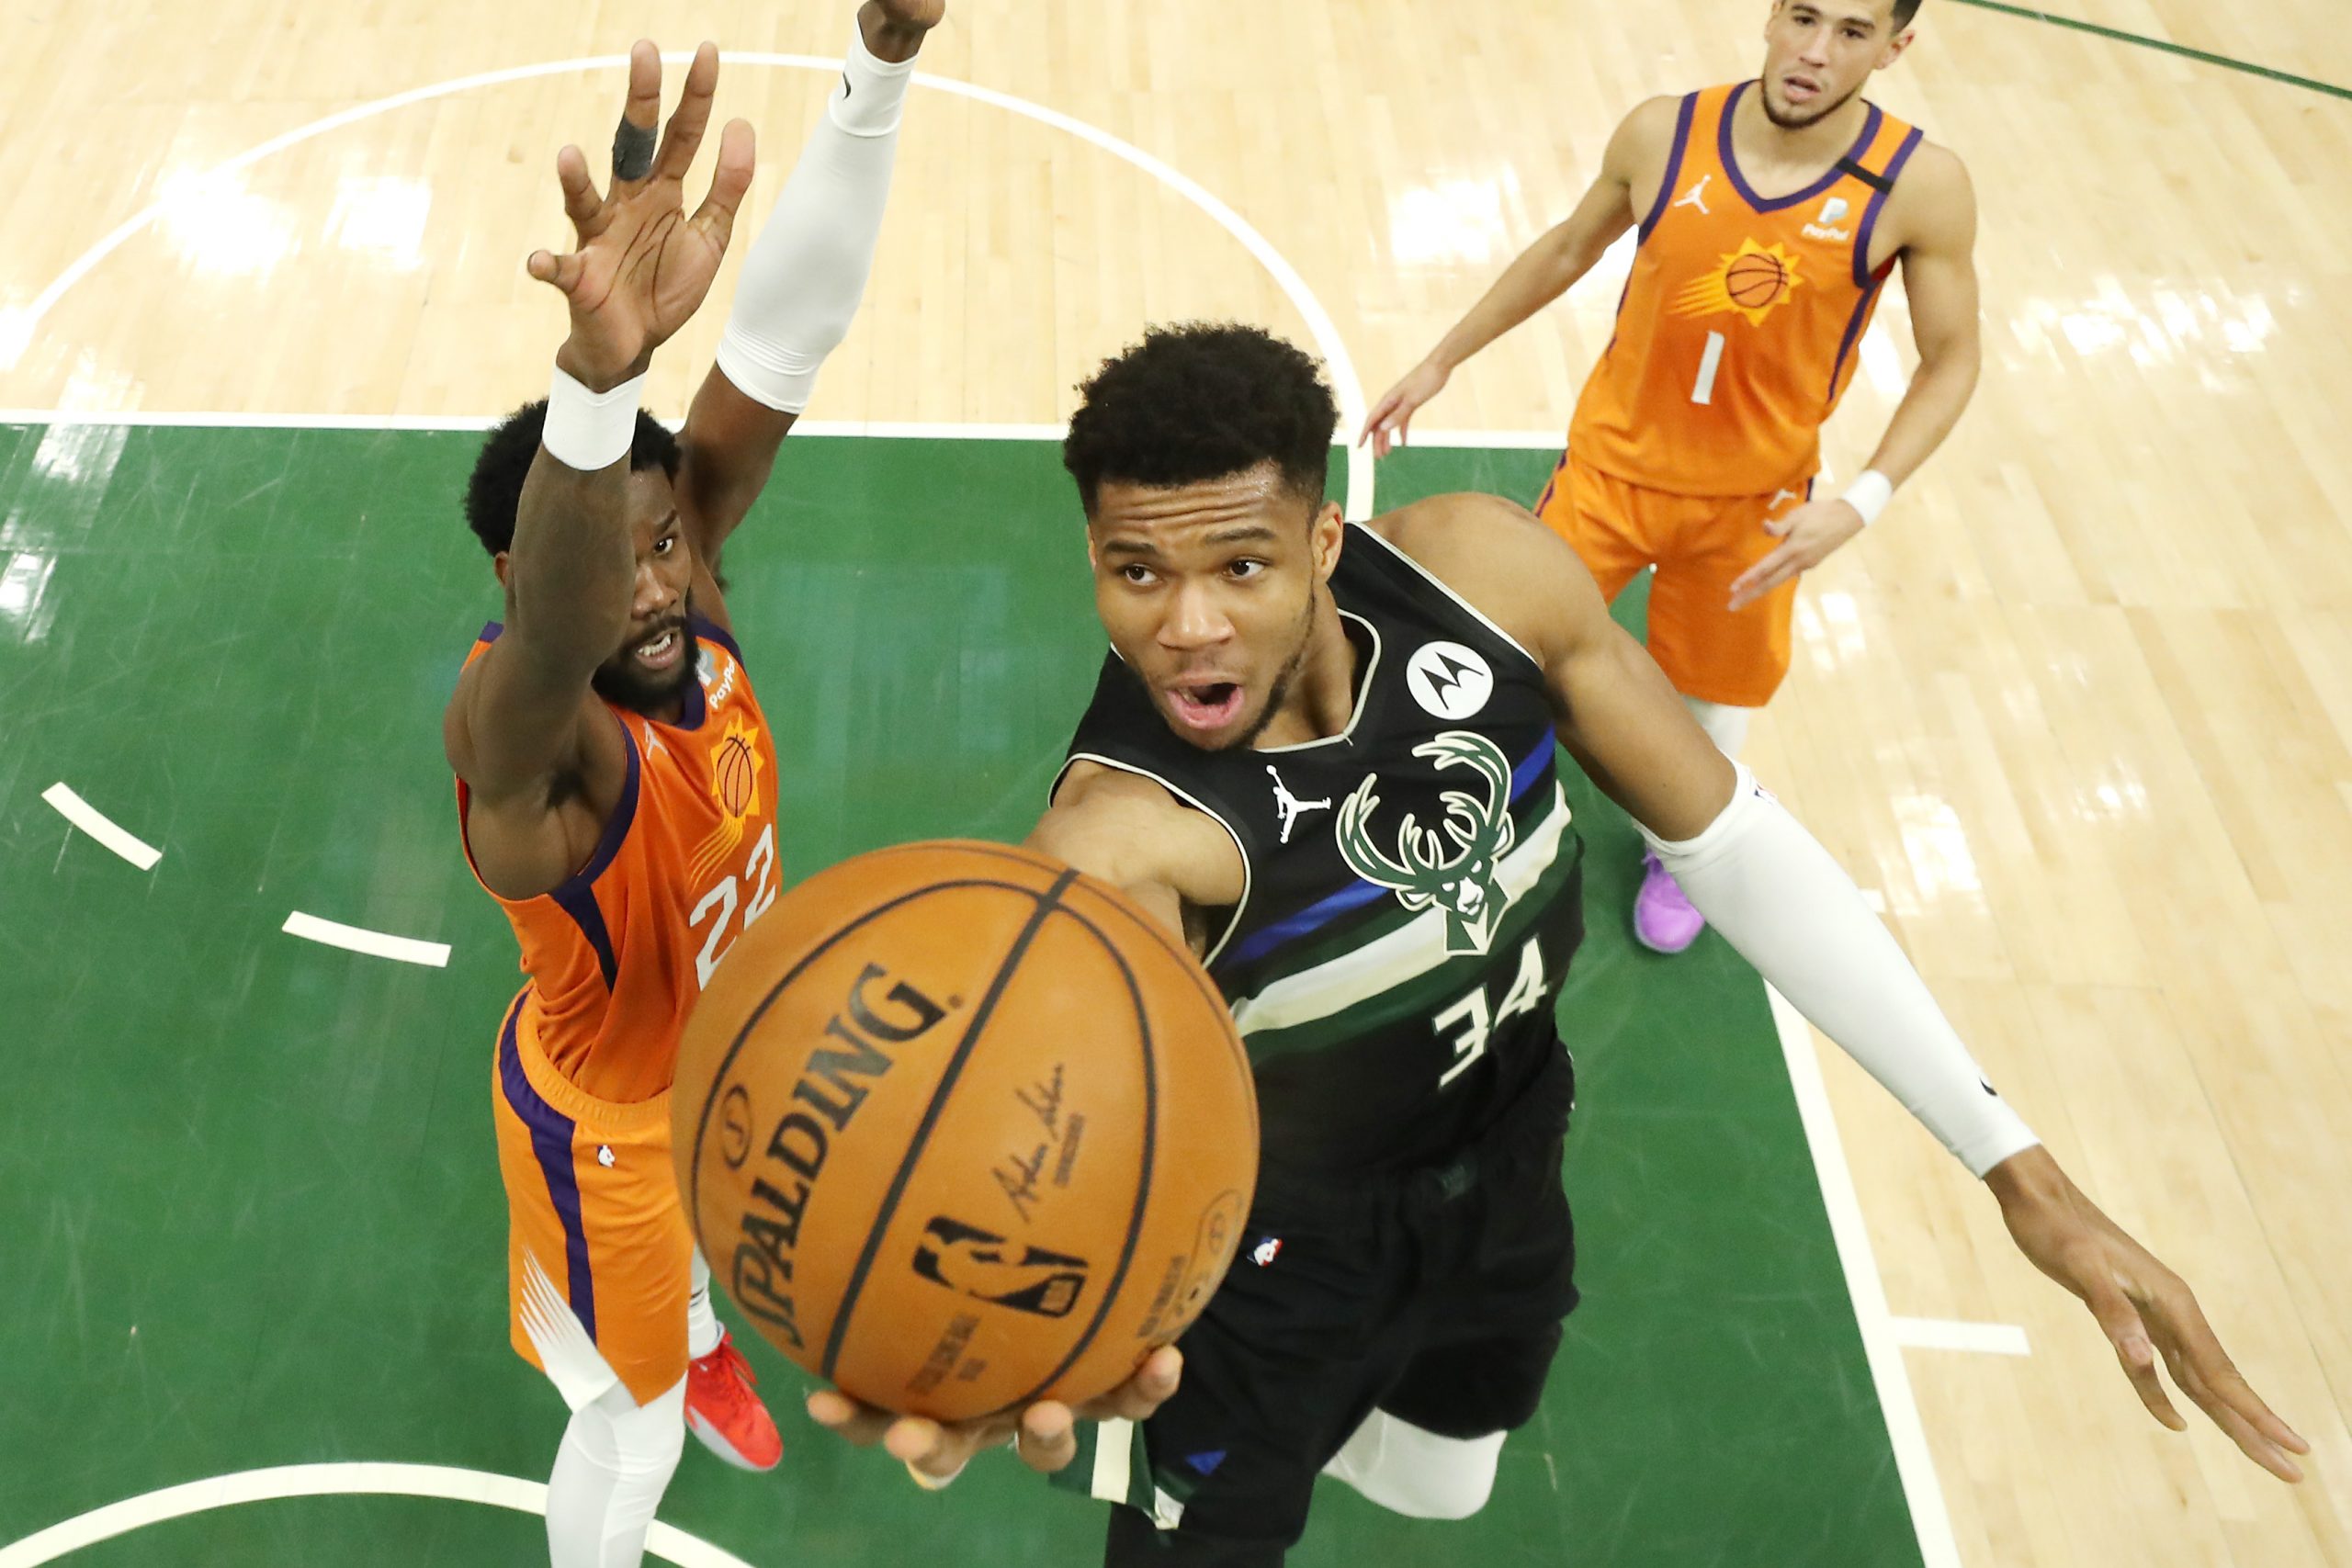 Giannis Antetokounmpo of the Milwaukee Bucks goes up for a shot against Deandre Ayton of the Phoenix Suns.